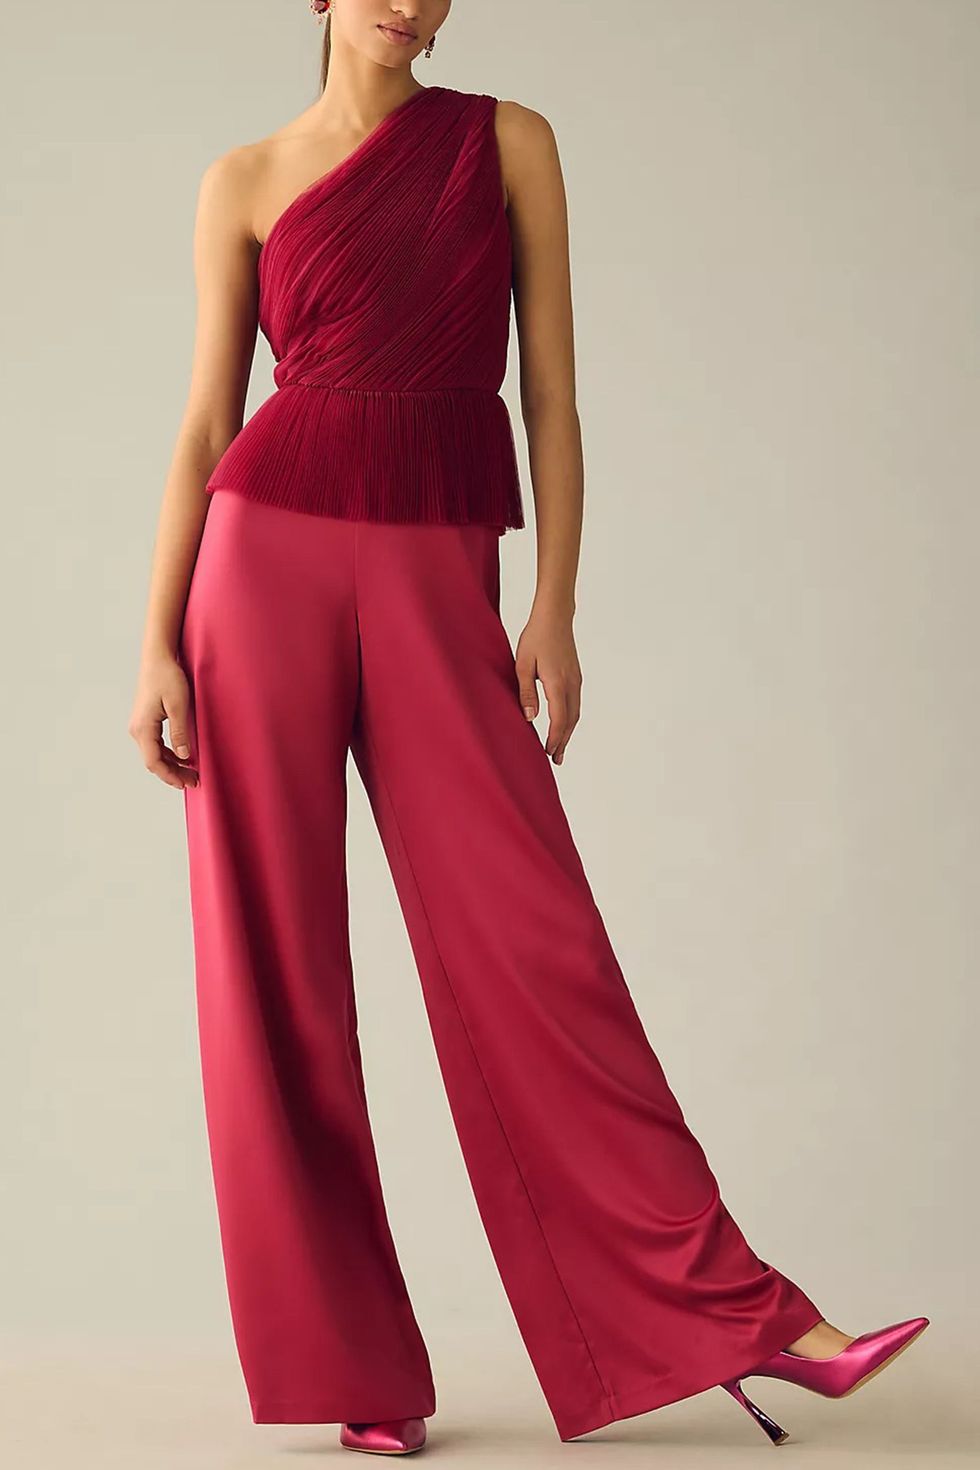 Sexy One Shoulder Jumpsuits Women Formal Party Dresses Evening